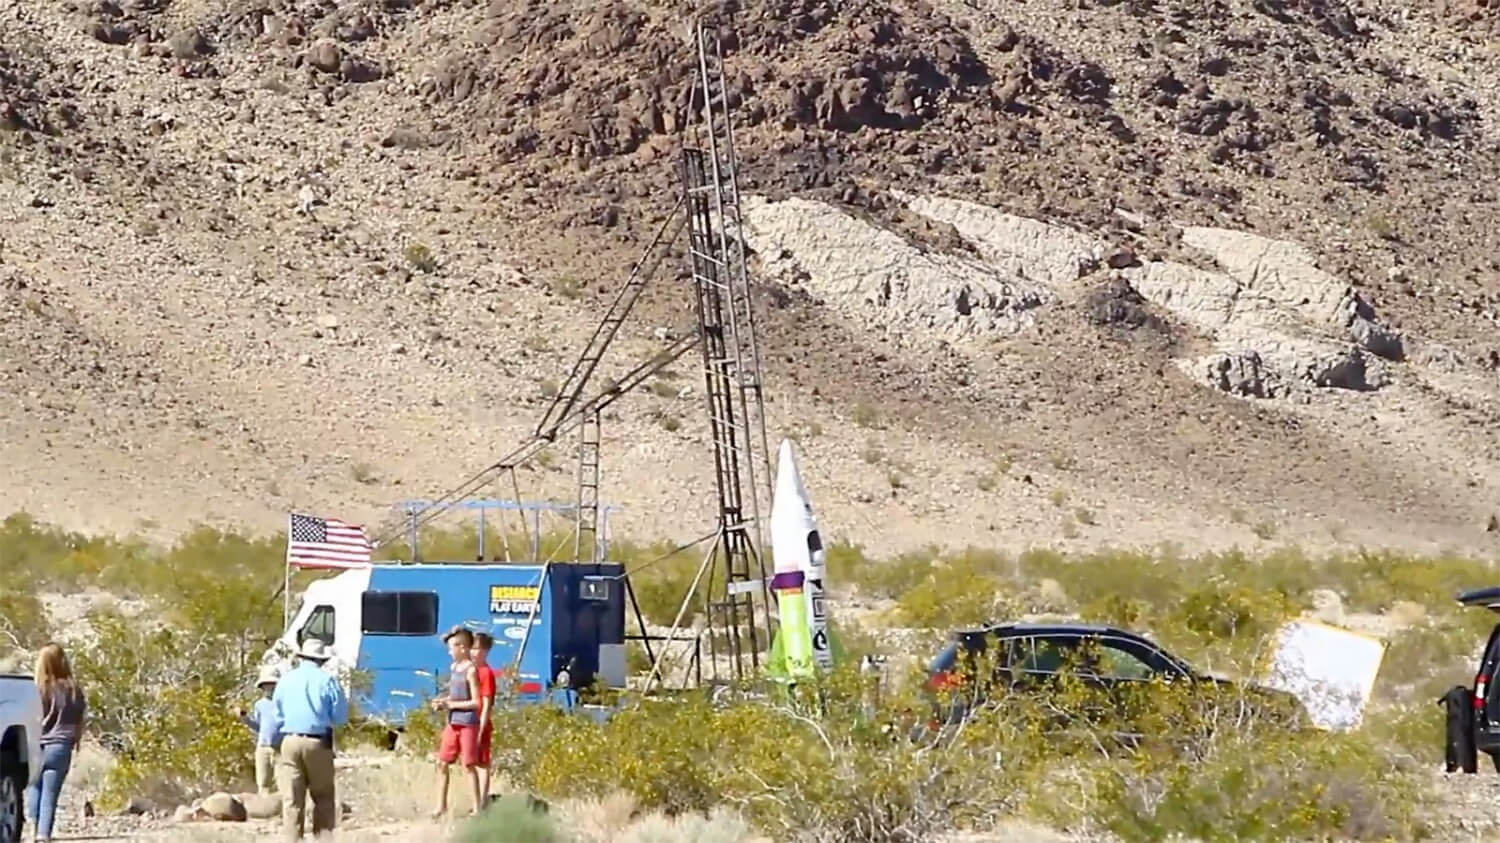 Flat-earther reaches 1875 feet in home-made steam rocket